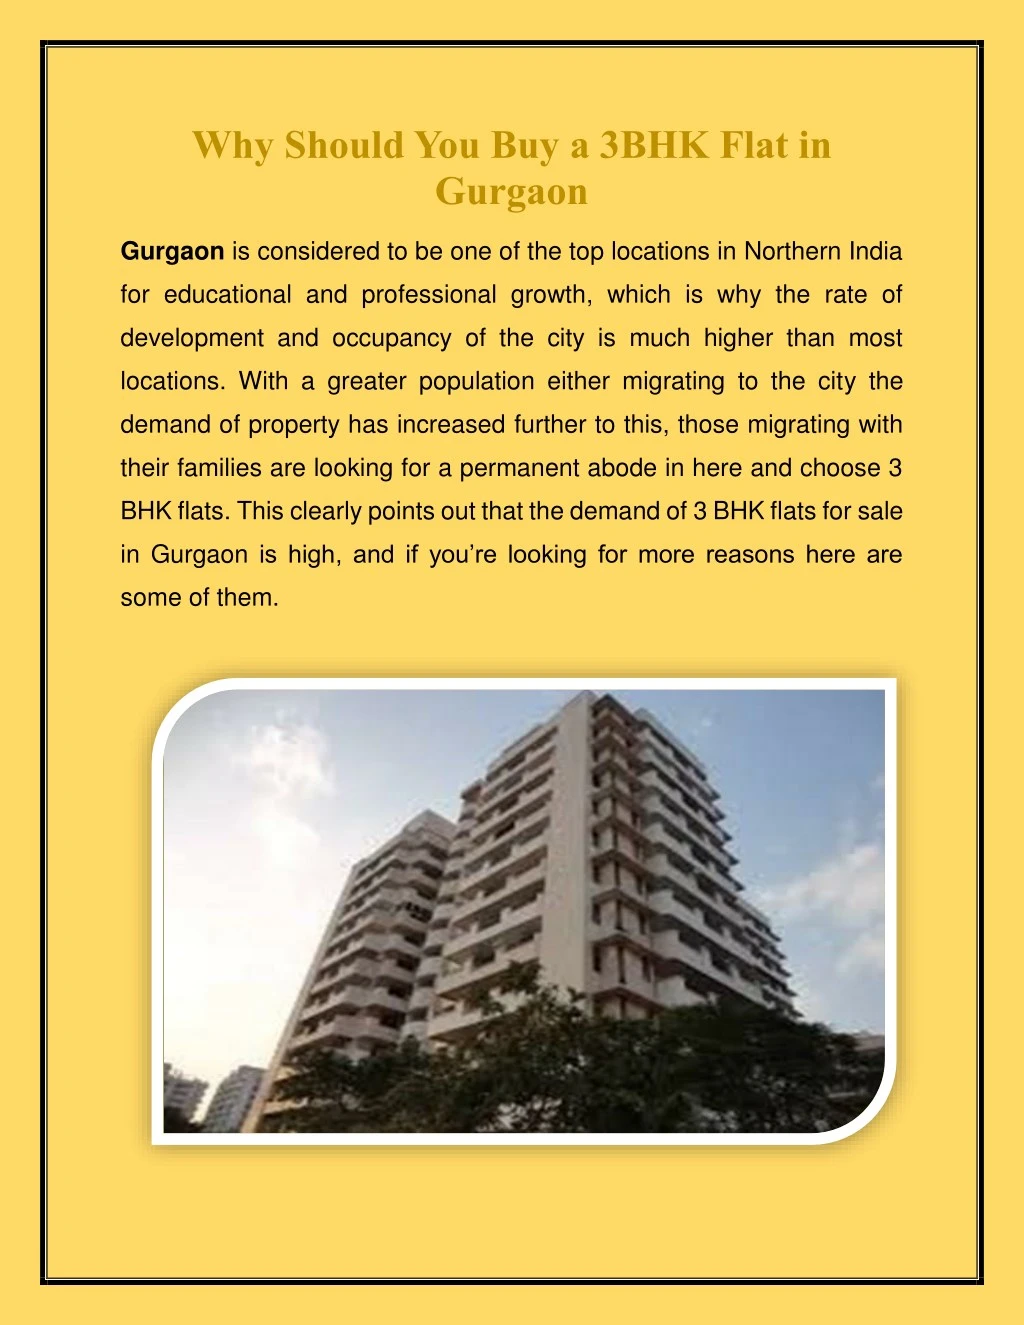 why should you buy a 3bhk flat in gurgaon